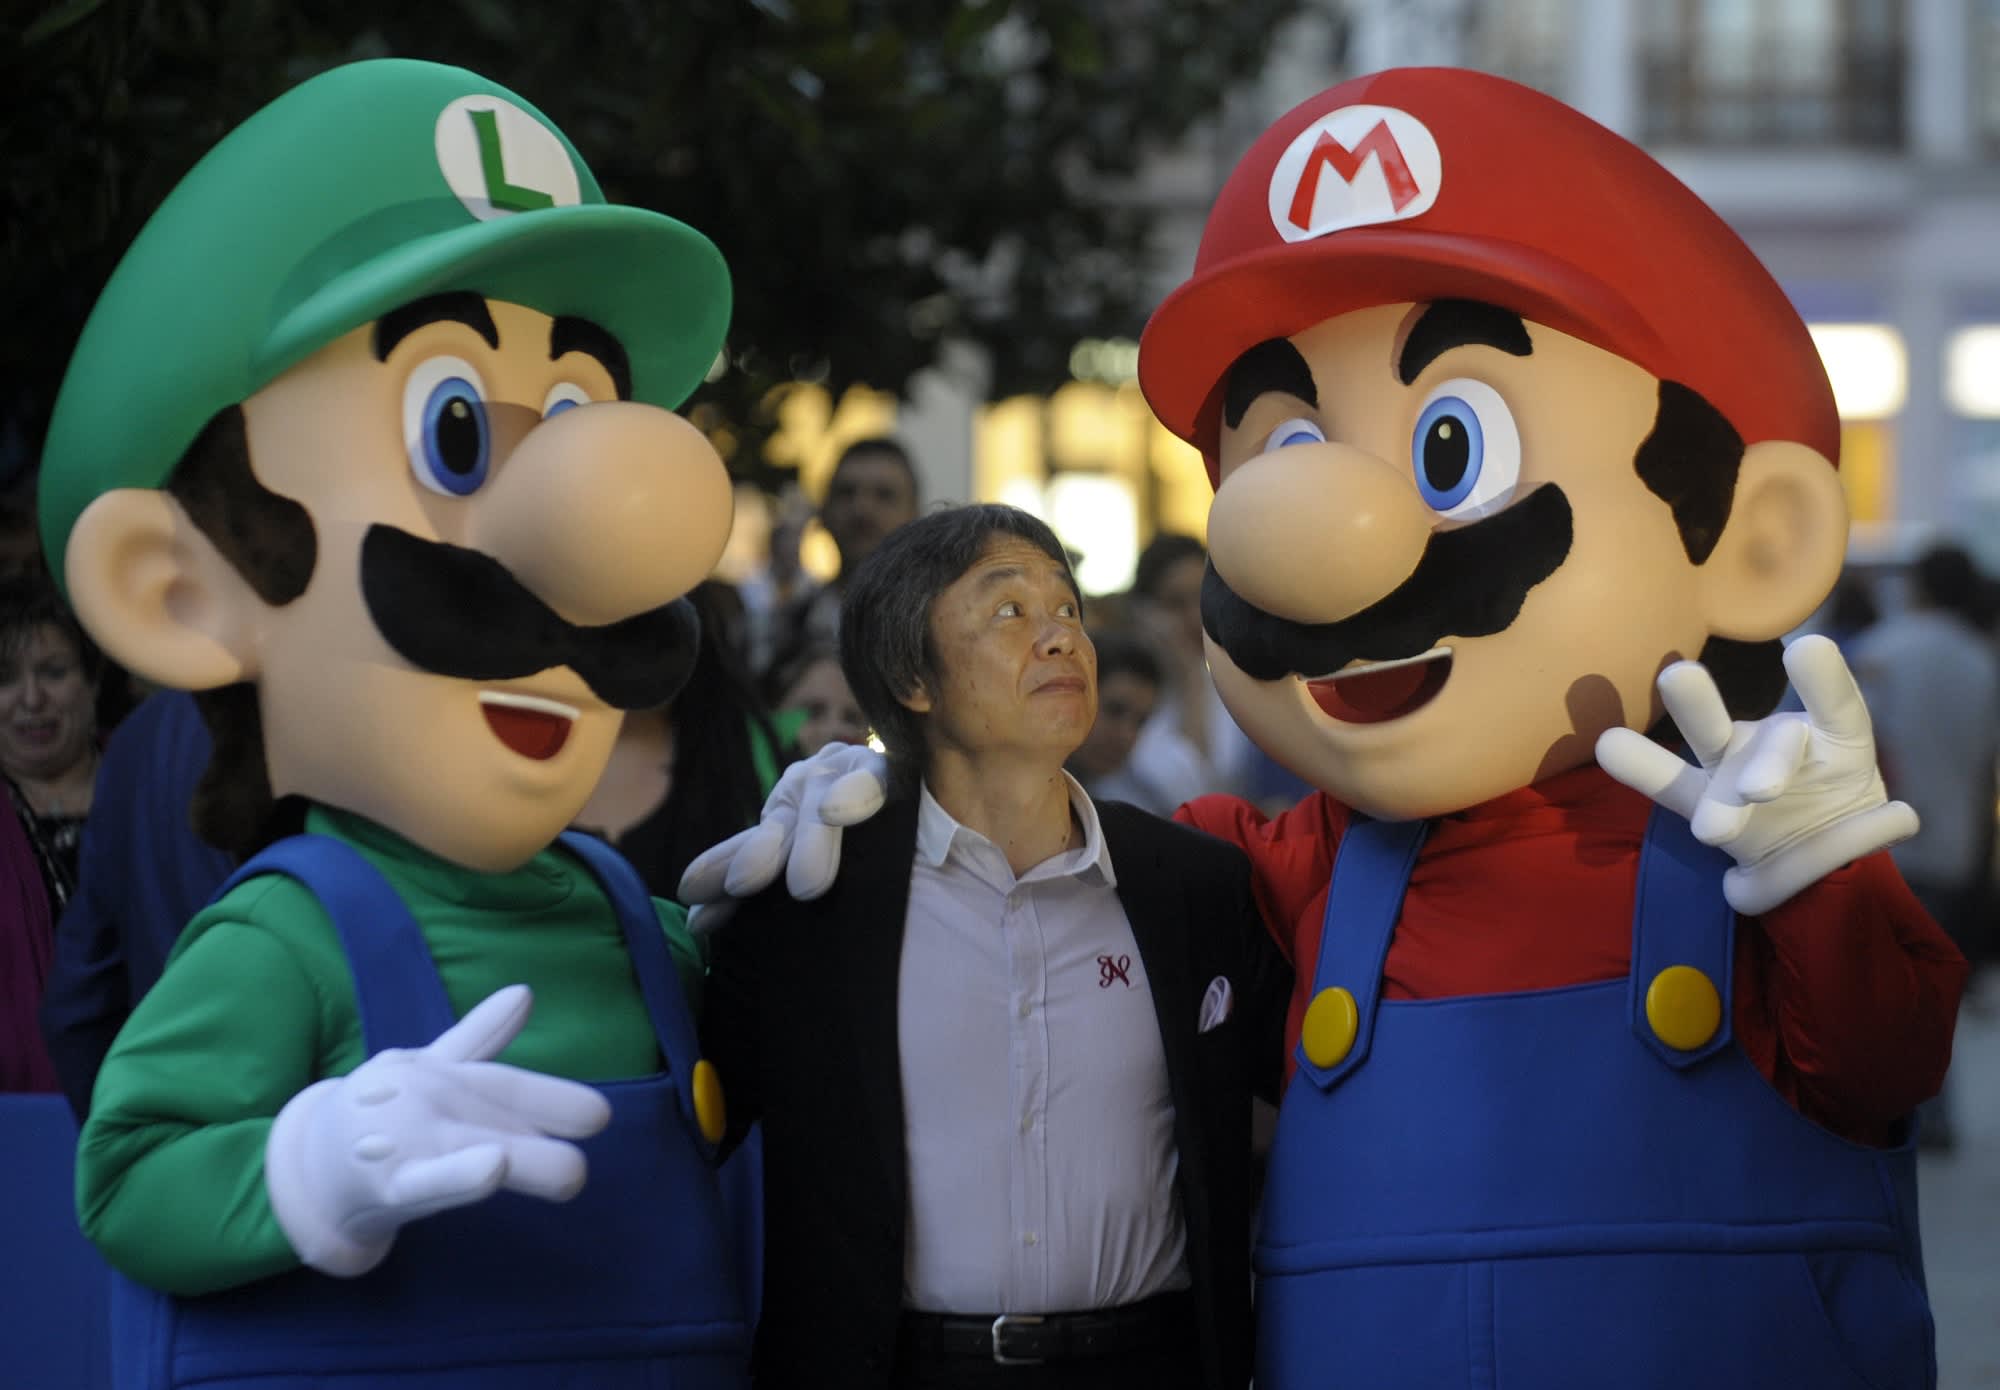 How Super Mario became a global cultural icon